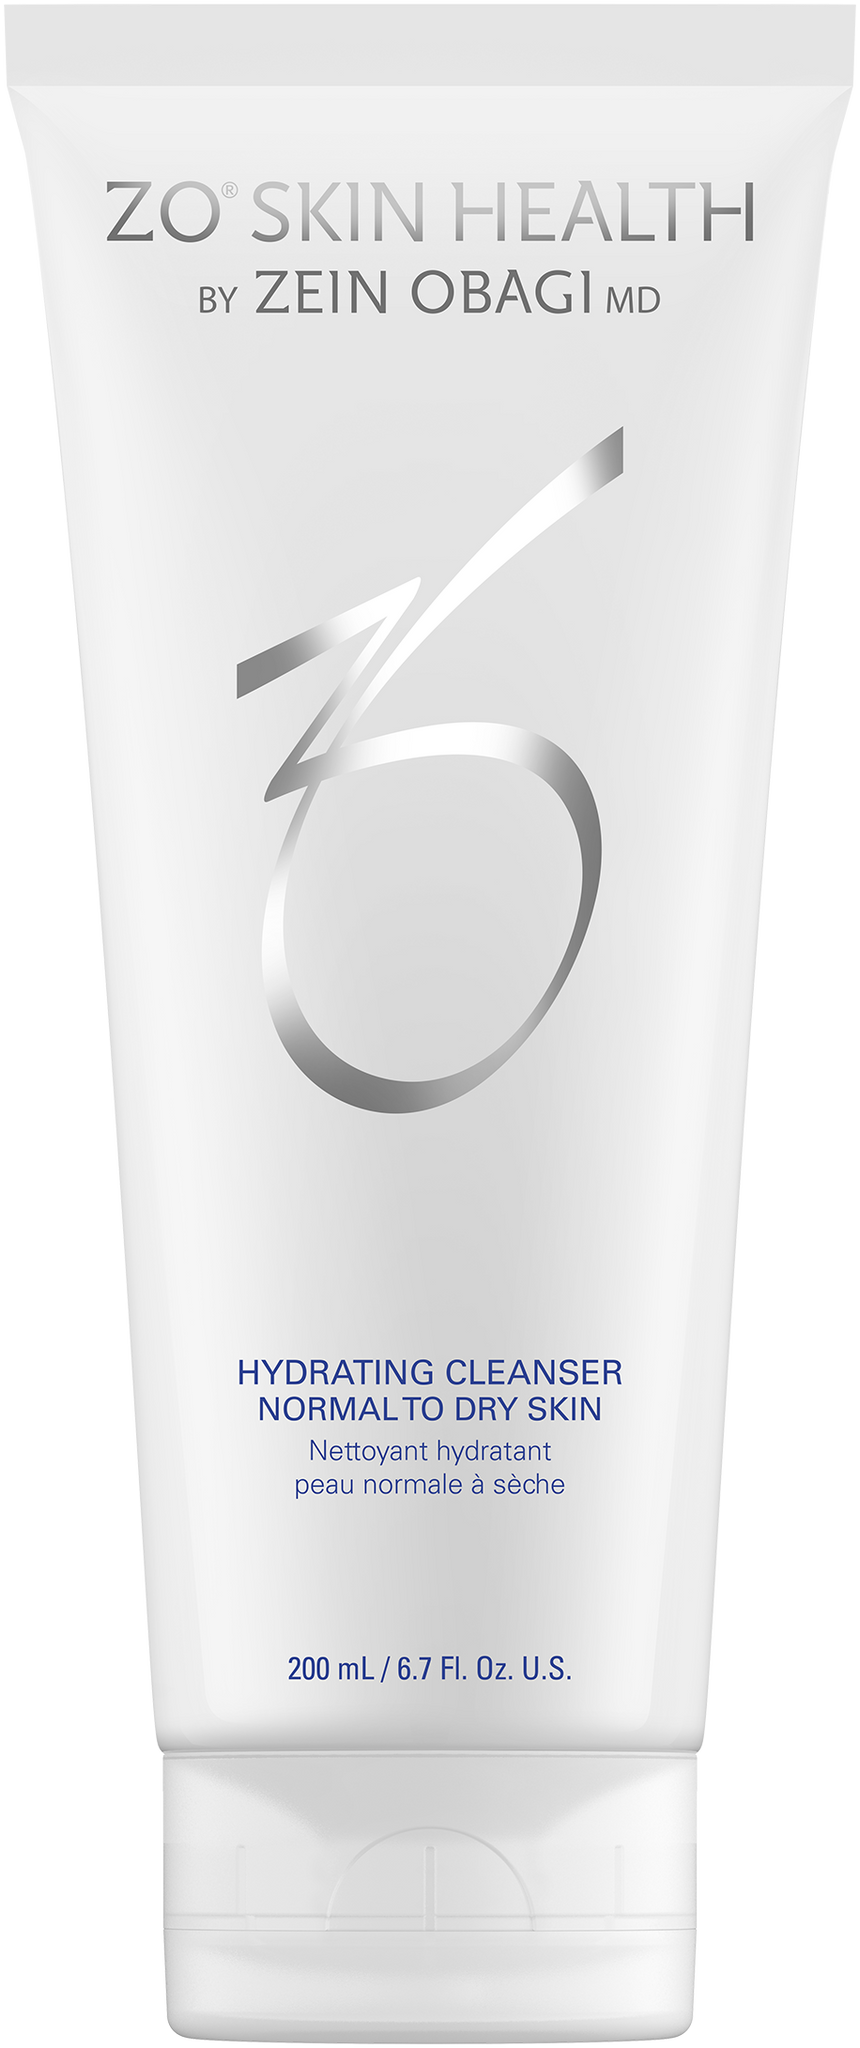 Zo Skin Health - Hydrating Cleanser Normal to Dry Skin